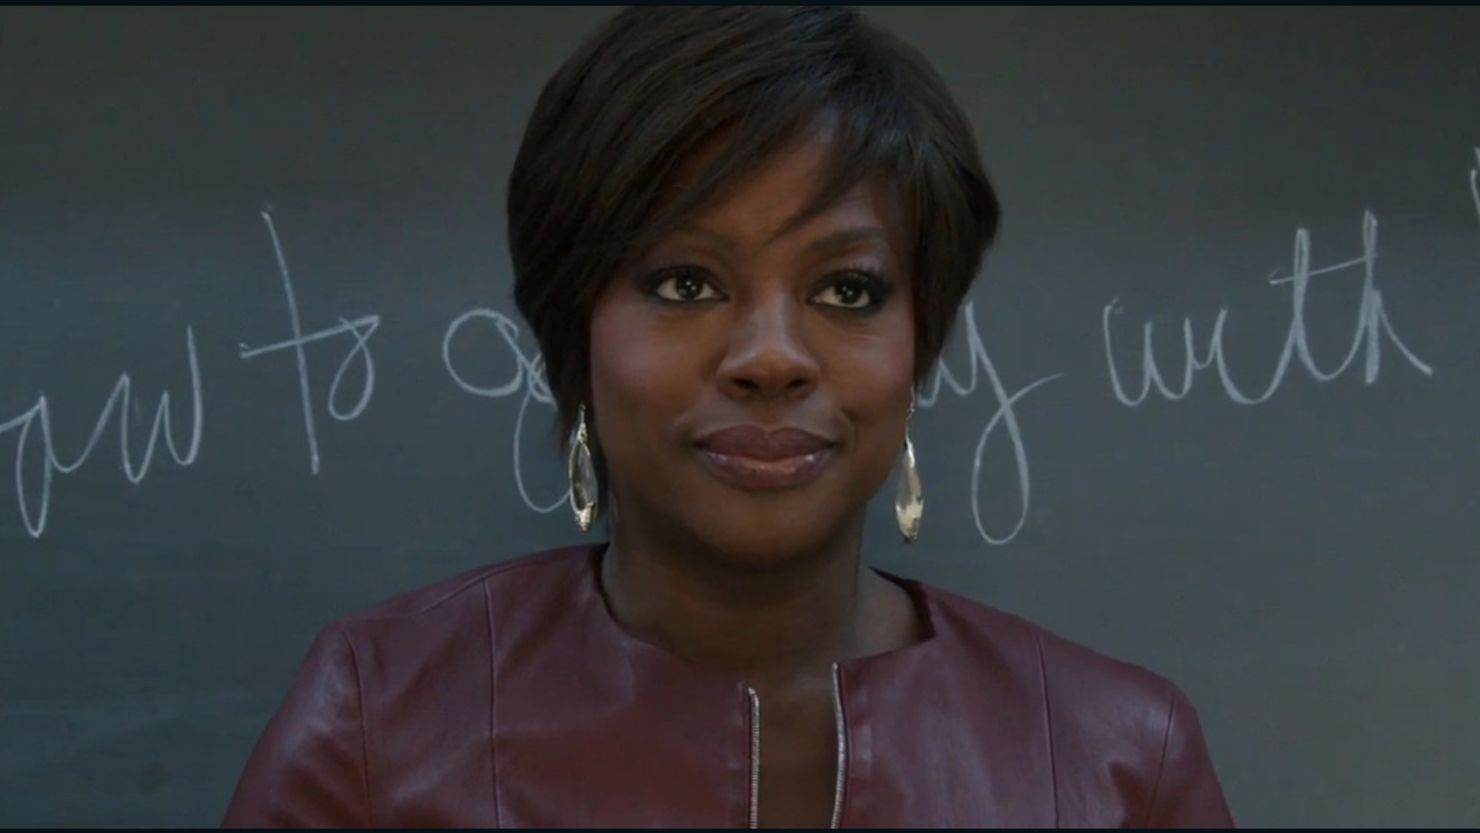 Viola Davis stars as a charismatic law professor in the new ABC series "How to Get Away with Murder."